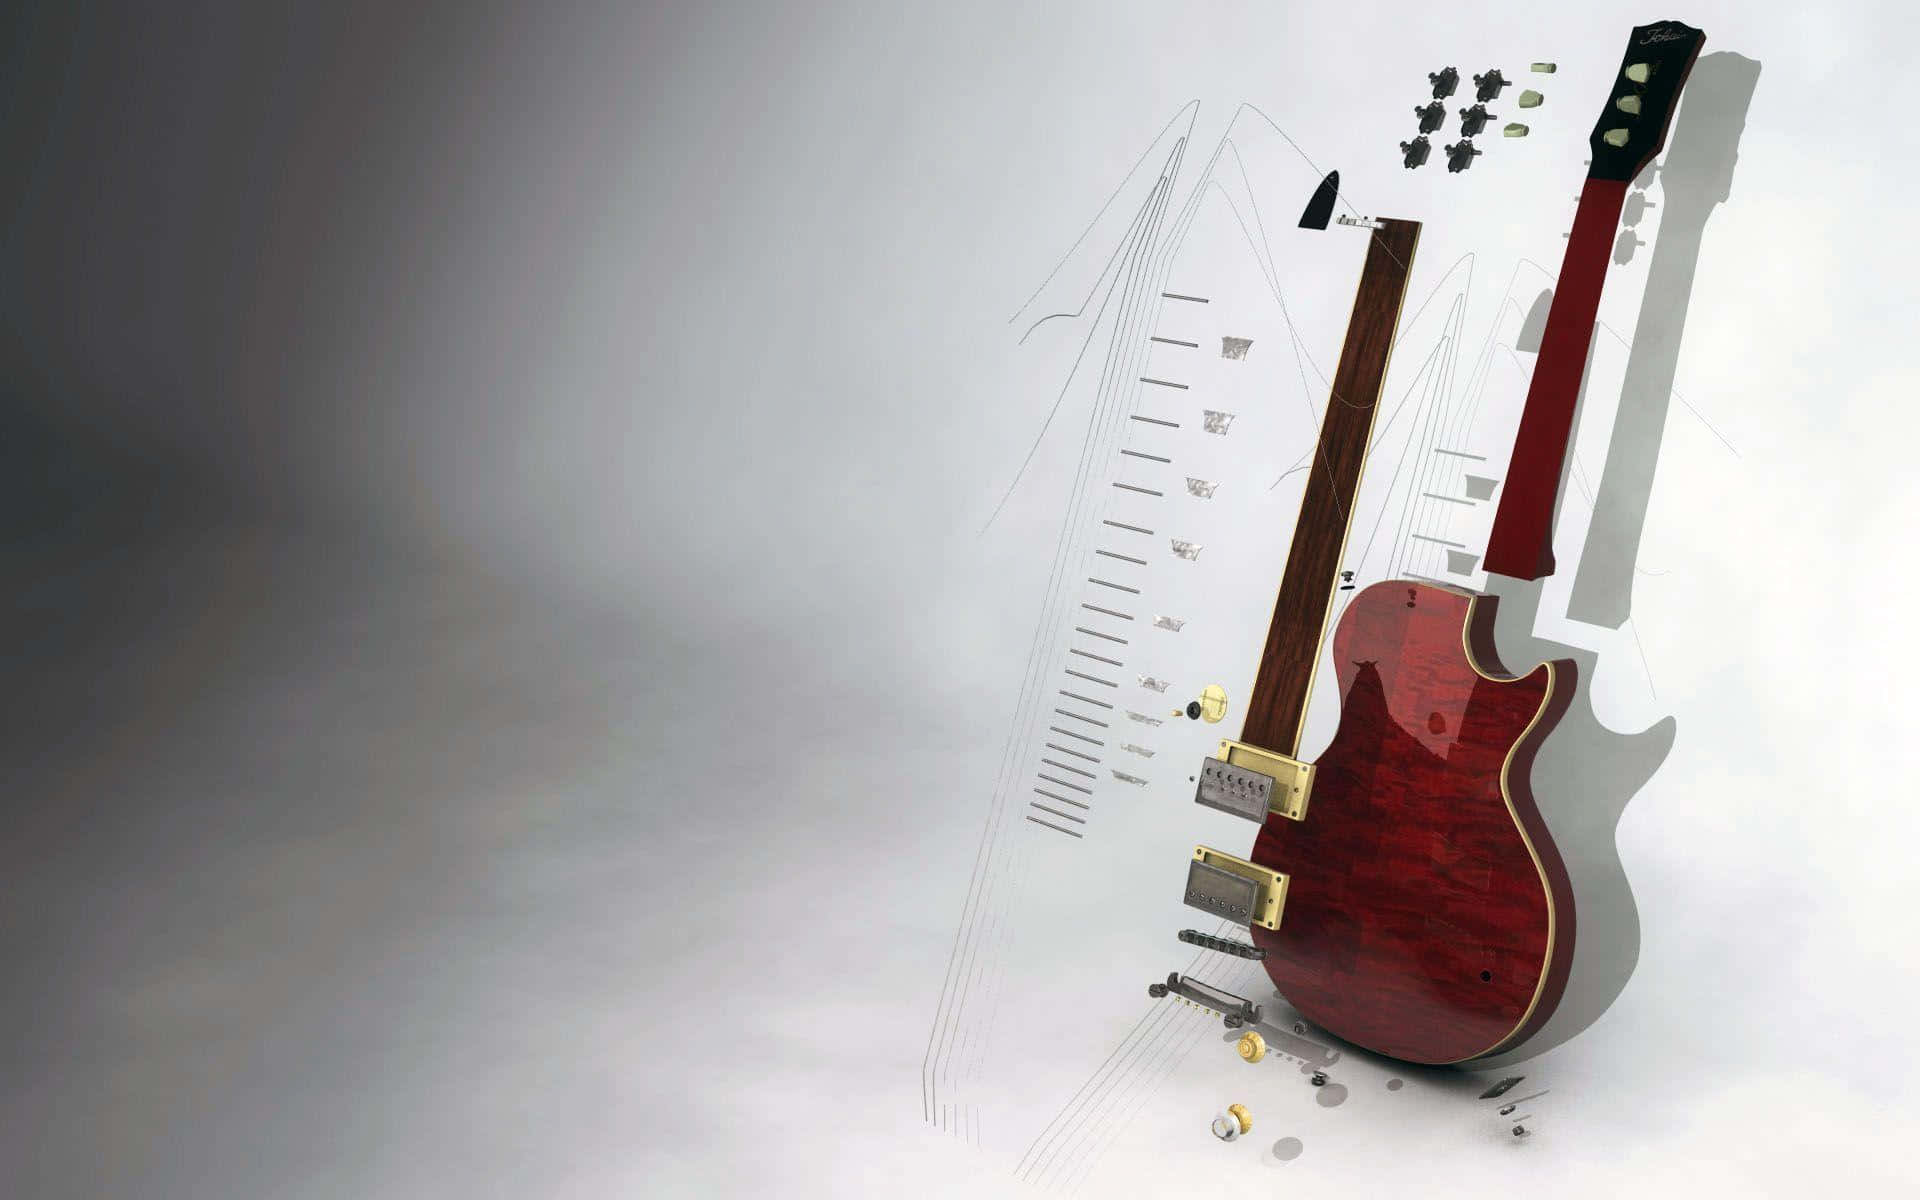 Musical Instrument Guitar Next To A Ruler Picture